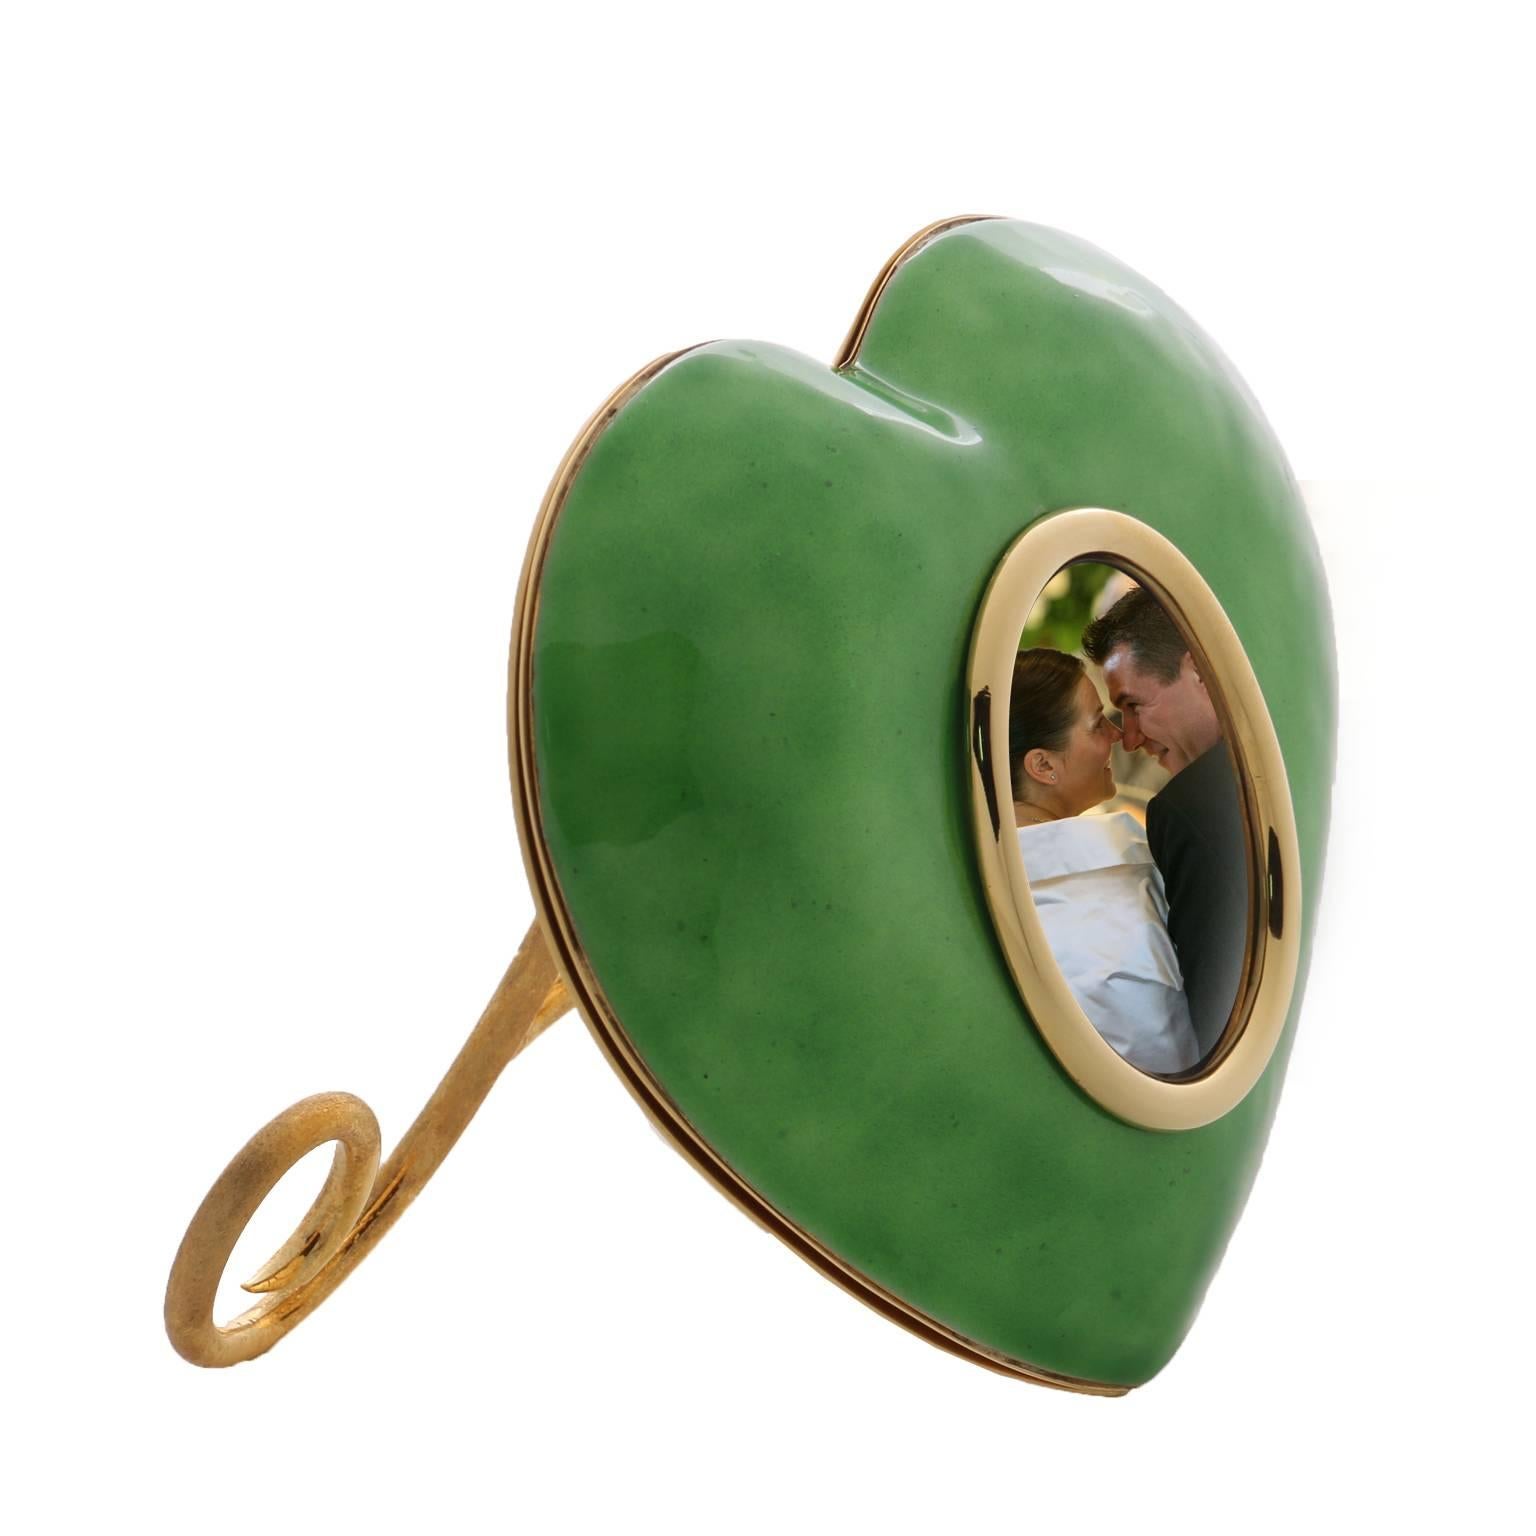 Laura G Heart green photo frame  is a perfect gift for every occasion.
Each one of us wants to express love in a gift or save our own precious memories of love into a lovely casket. Handcrafted by Italian artisans, it holds on the back small hearts 